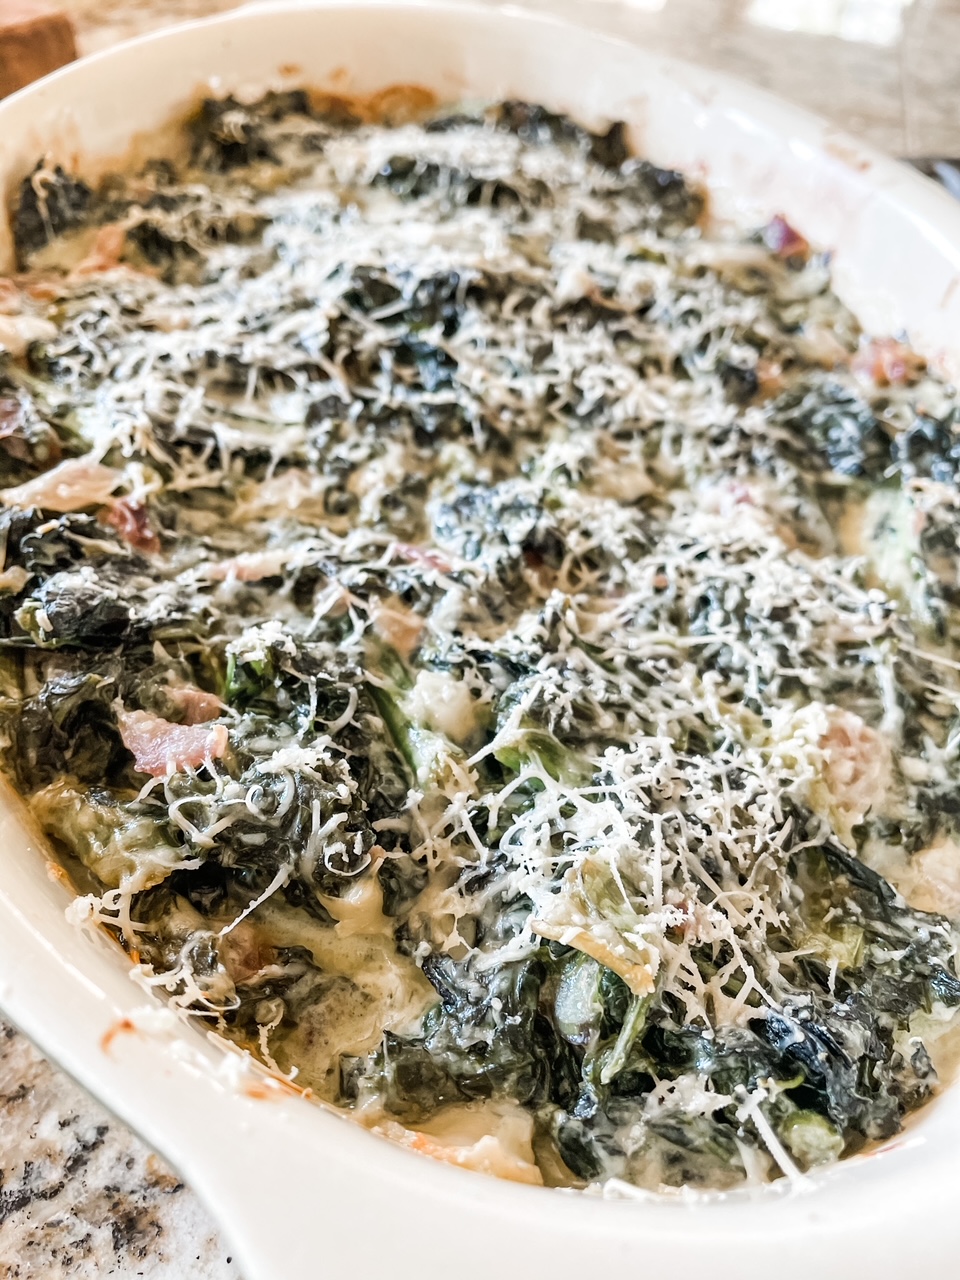 A close up of the finished Creamed Kale Casserole with Parmesan